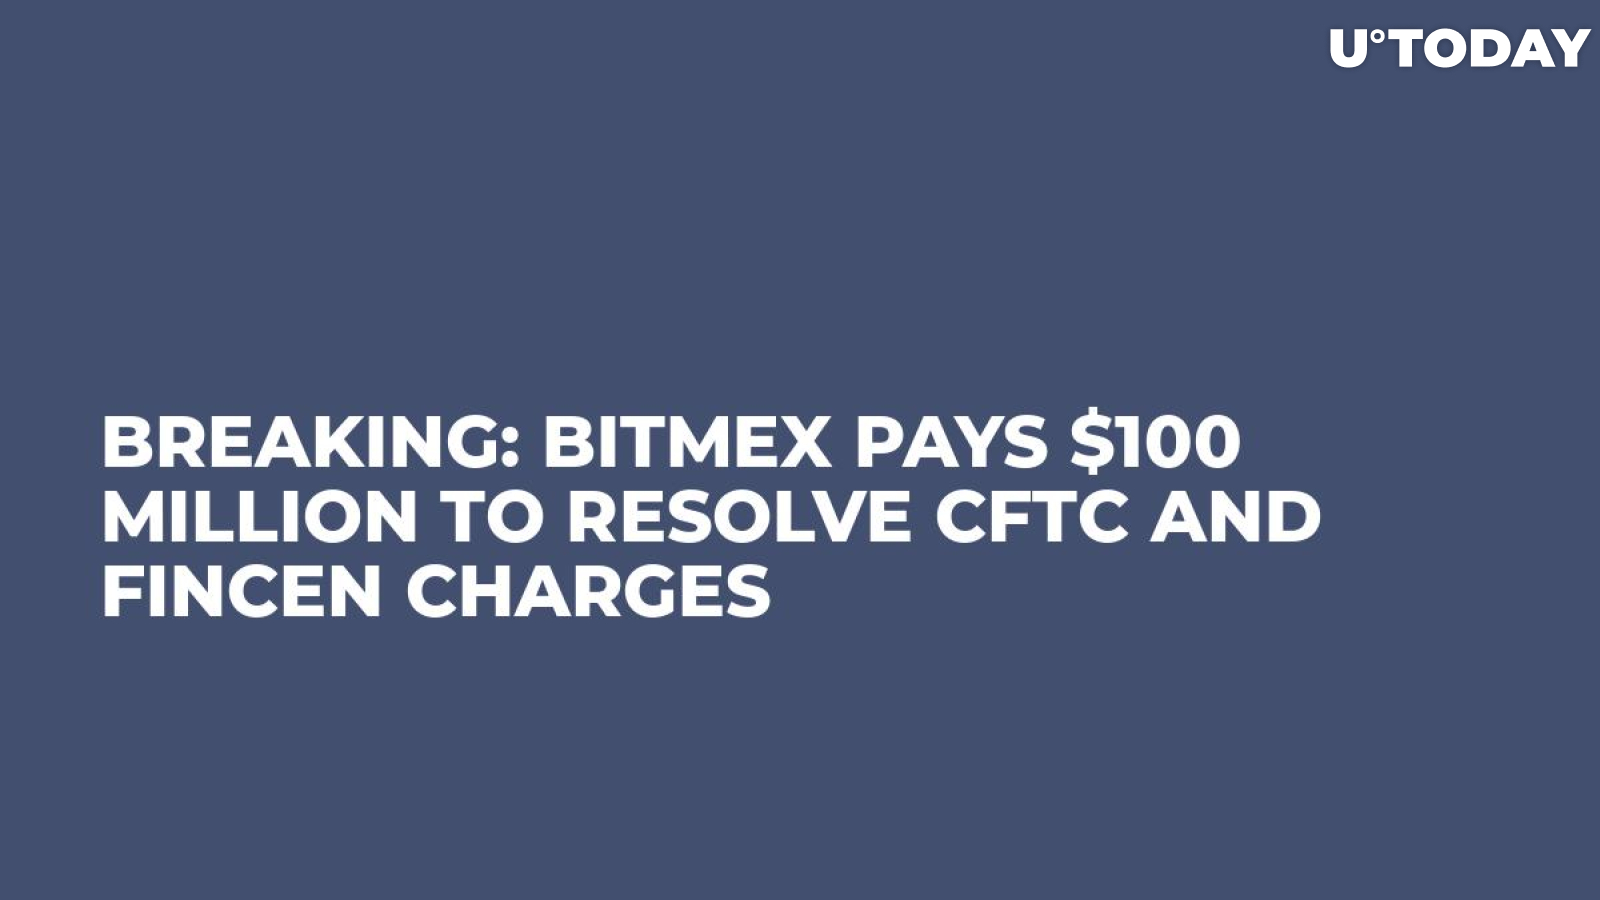 BREAKING: BitMEX Pays $100 Million to Resolve CFTC and FinCEN Charges